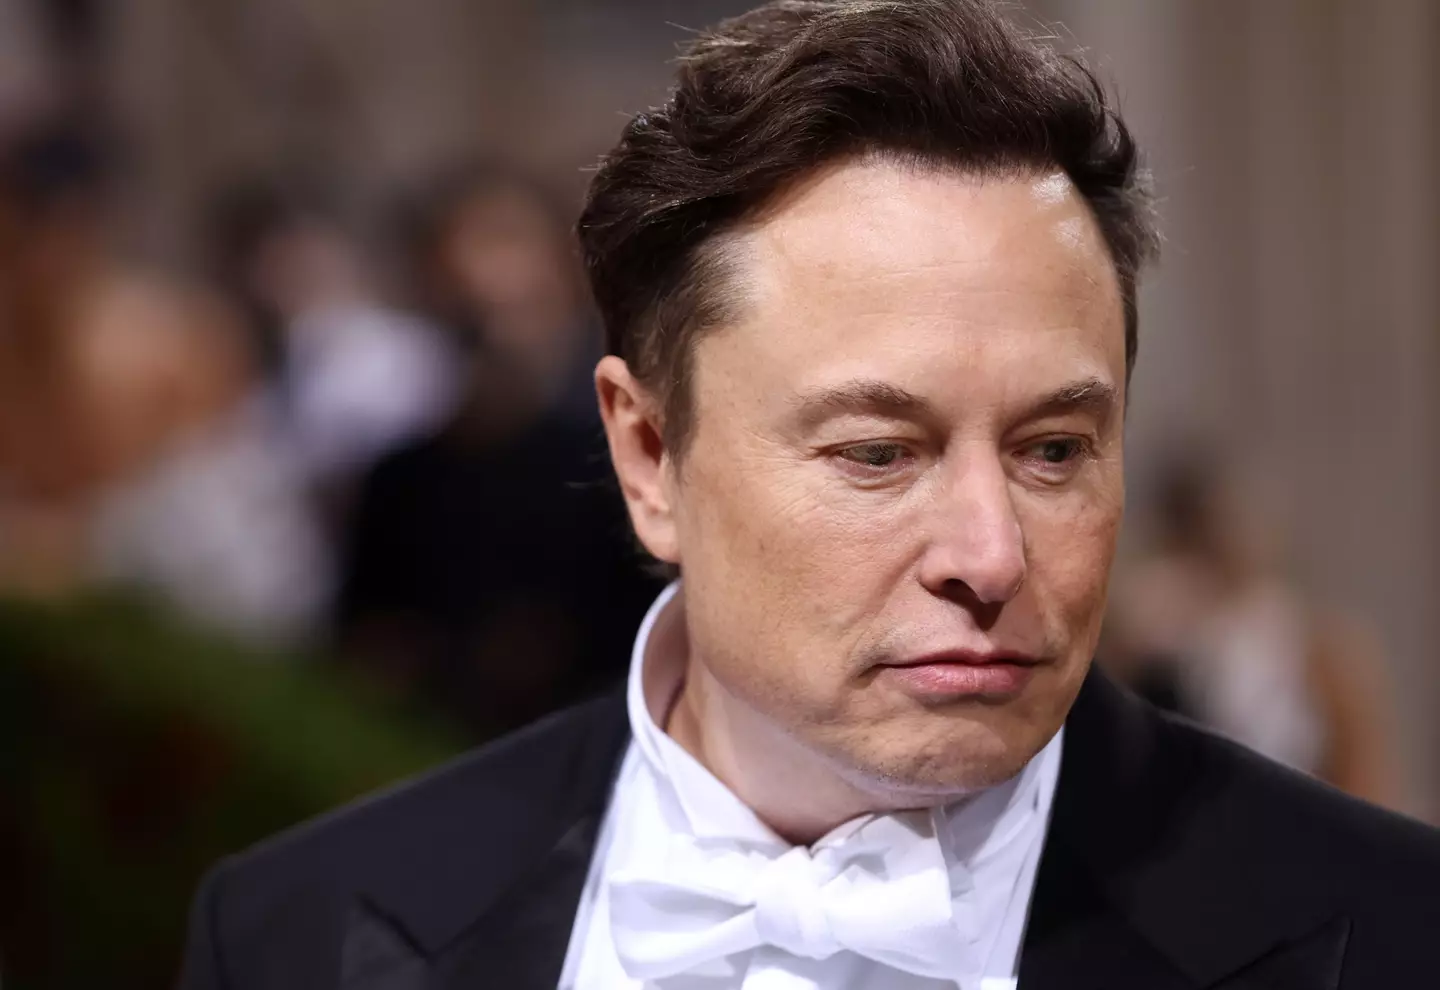 Musk has vowed to enhance 'free speech' on Twitter as well as cracking down on anonymity.